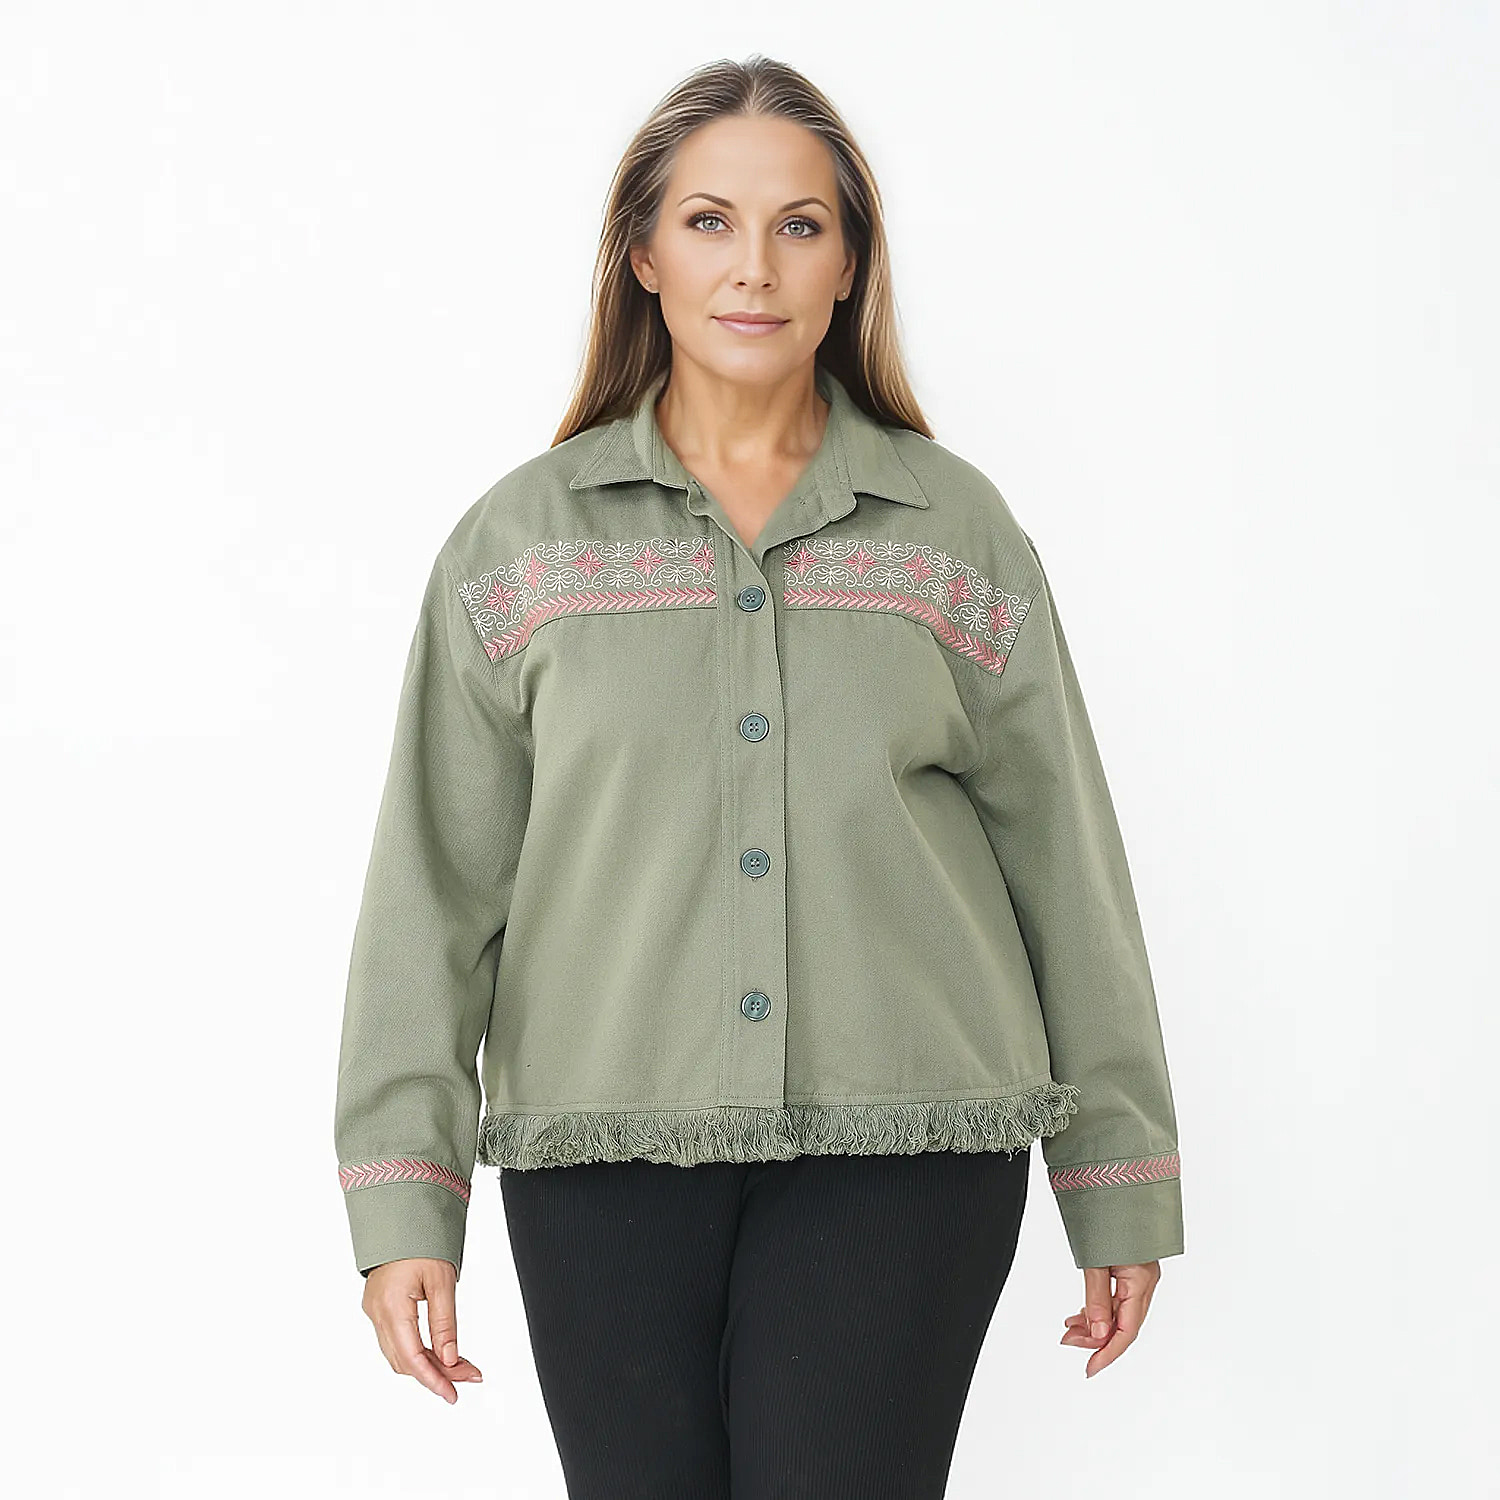 Tamsy 100% Cotton Embroidered Jacket (Size XXL,24-26) - Moss Green